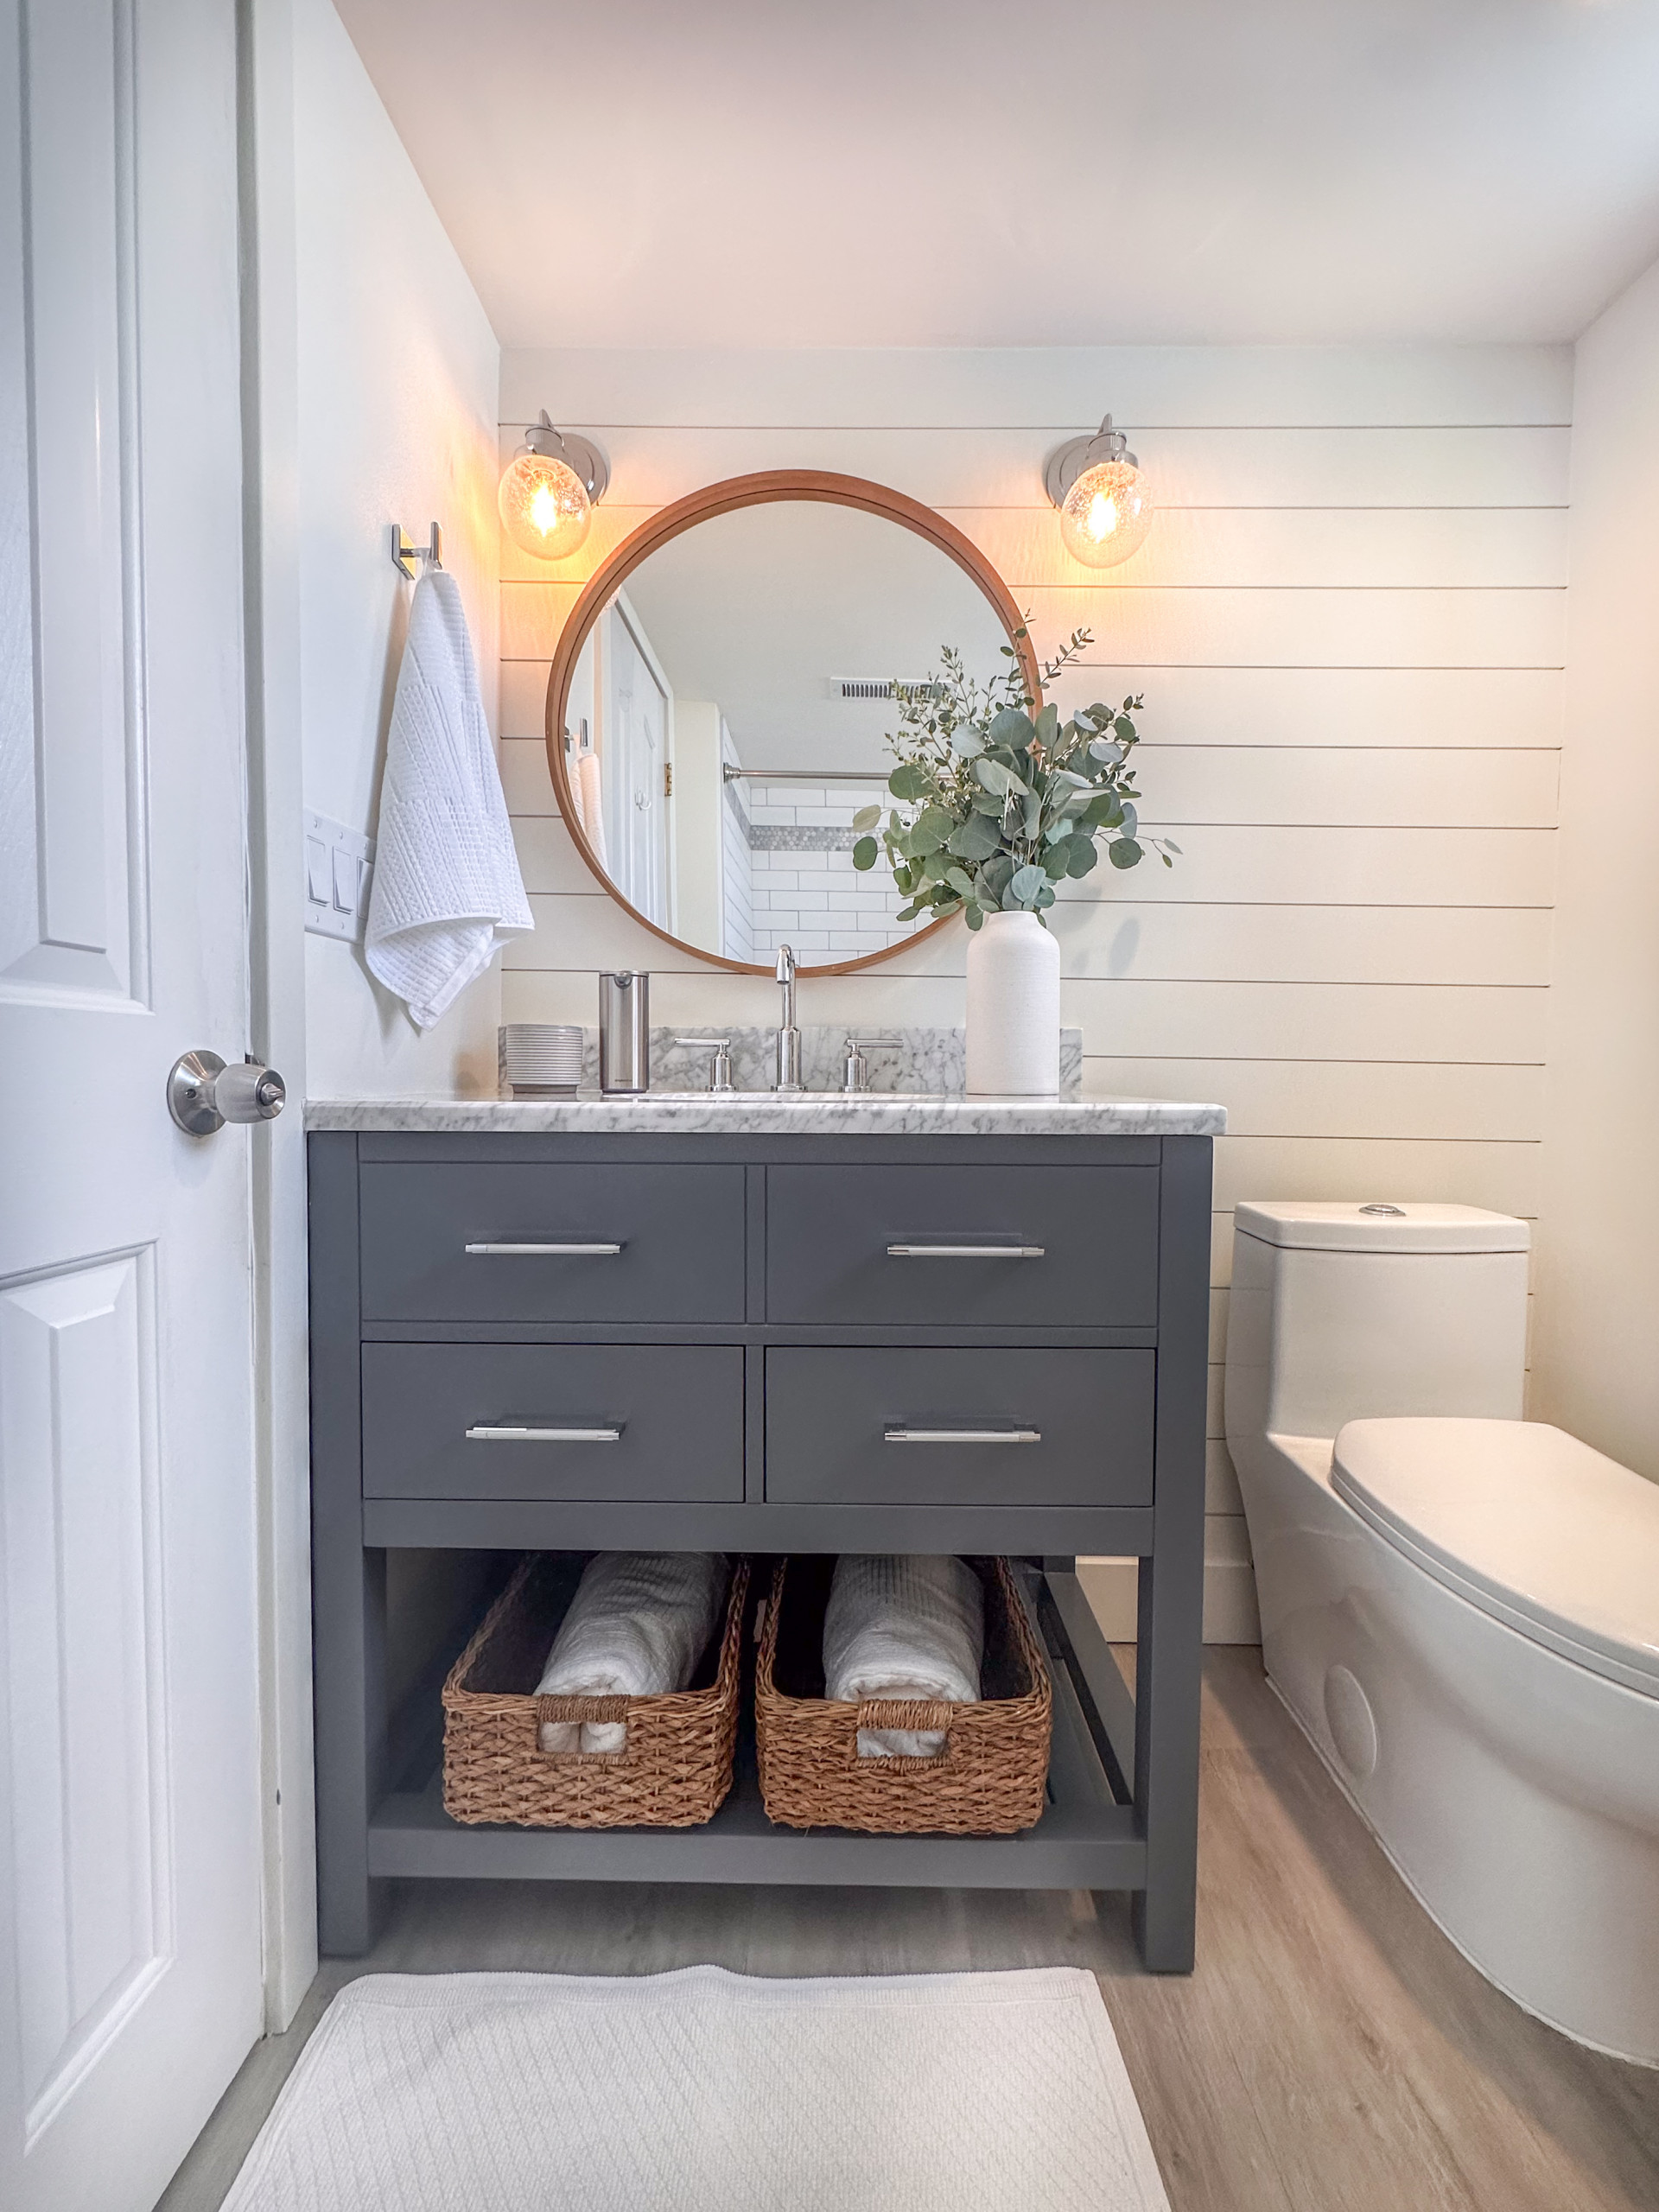 Modern farmhouse bathroom remodel featuring a beautiful Carrara marble counter and gray vanity which includes two drawers and an open shelf at the bottom for wicker baskets that add warmth and texture